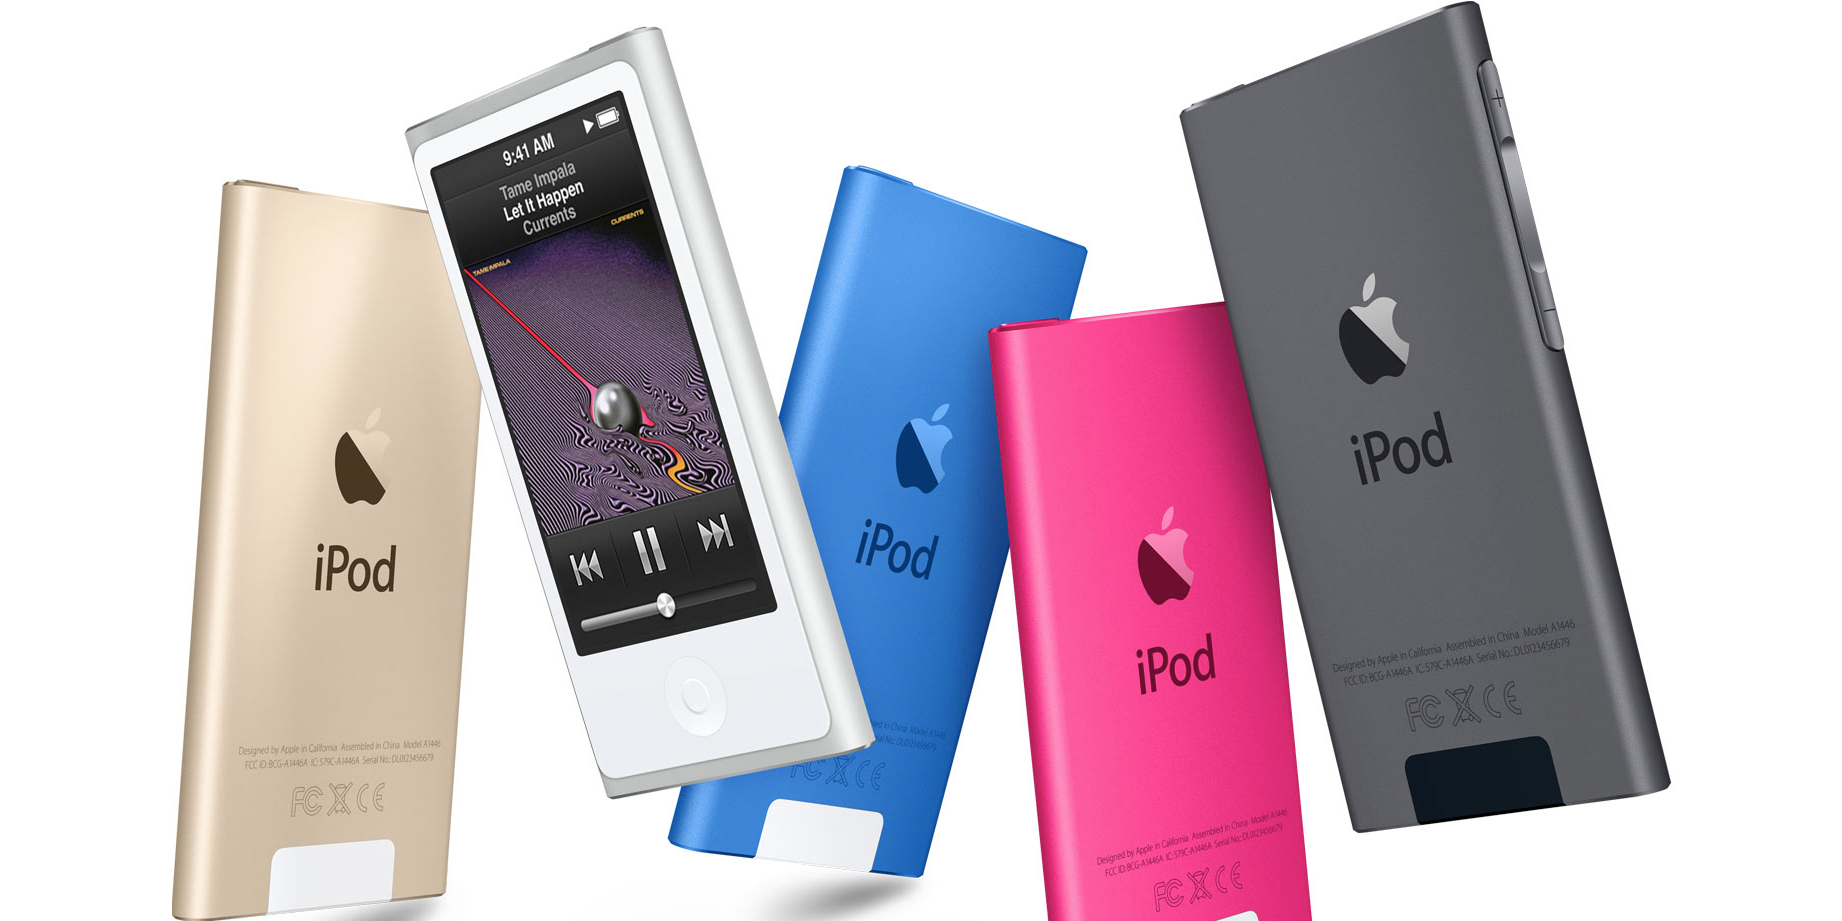 The iPod is dead